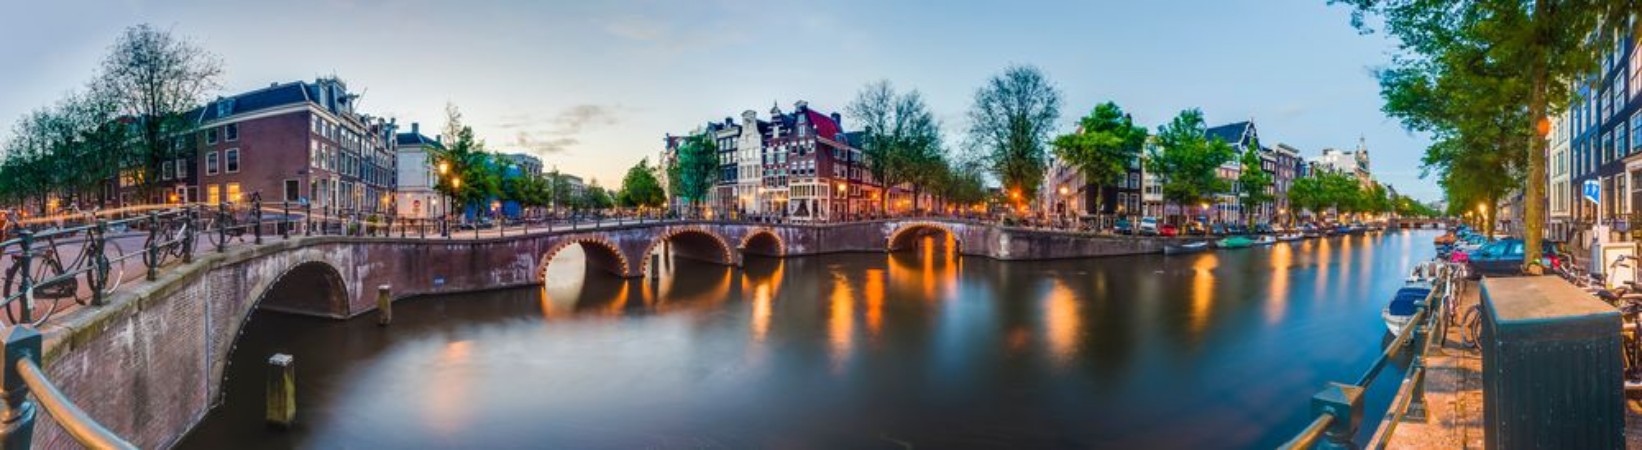 Picture of Keizersgracht canal in Amsterdam Netherlands